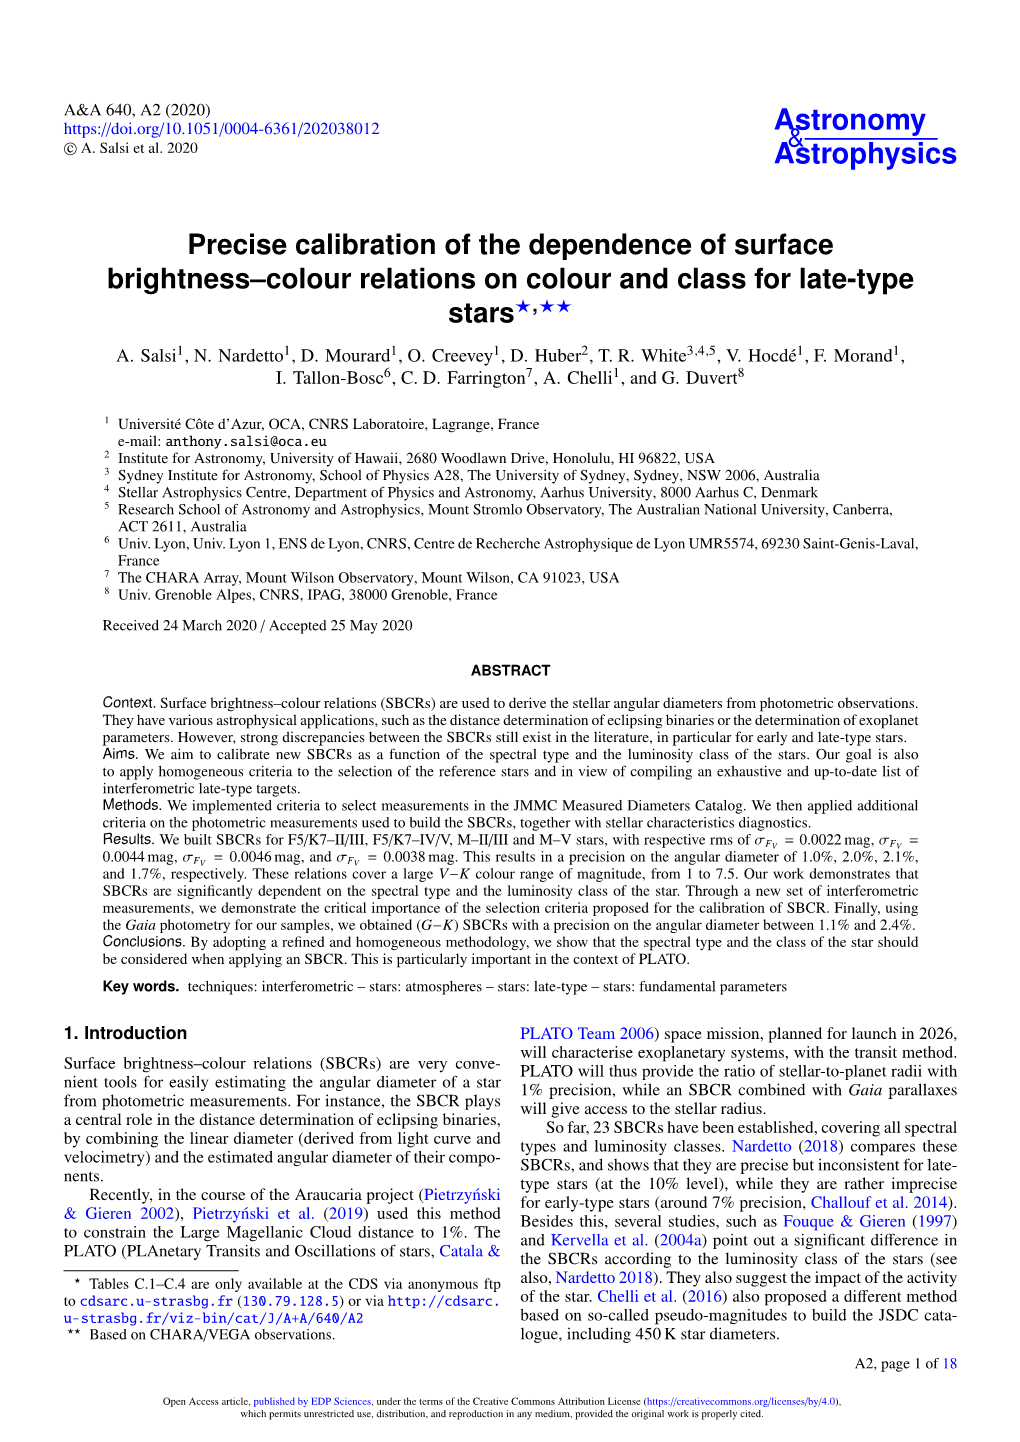 Precise Calibration of the Dependence of Surface Brightness–Colour Relations on Colour and Class for Late-Type Stars?,?? A